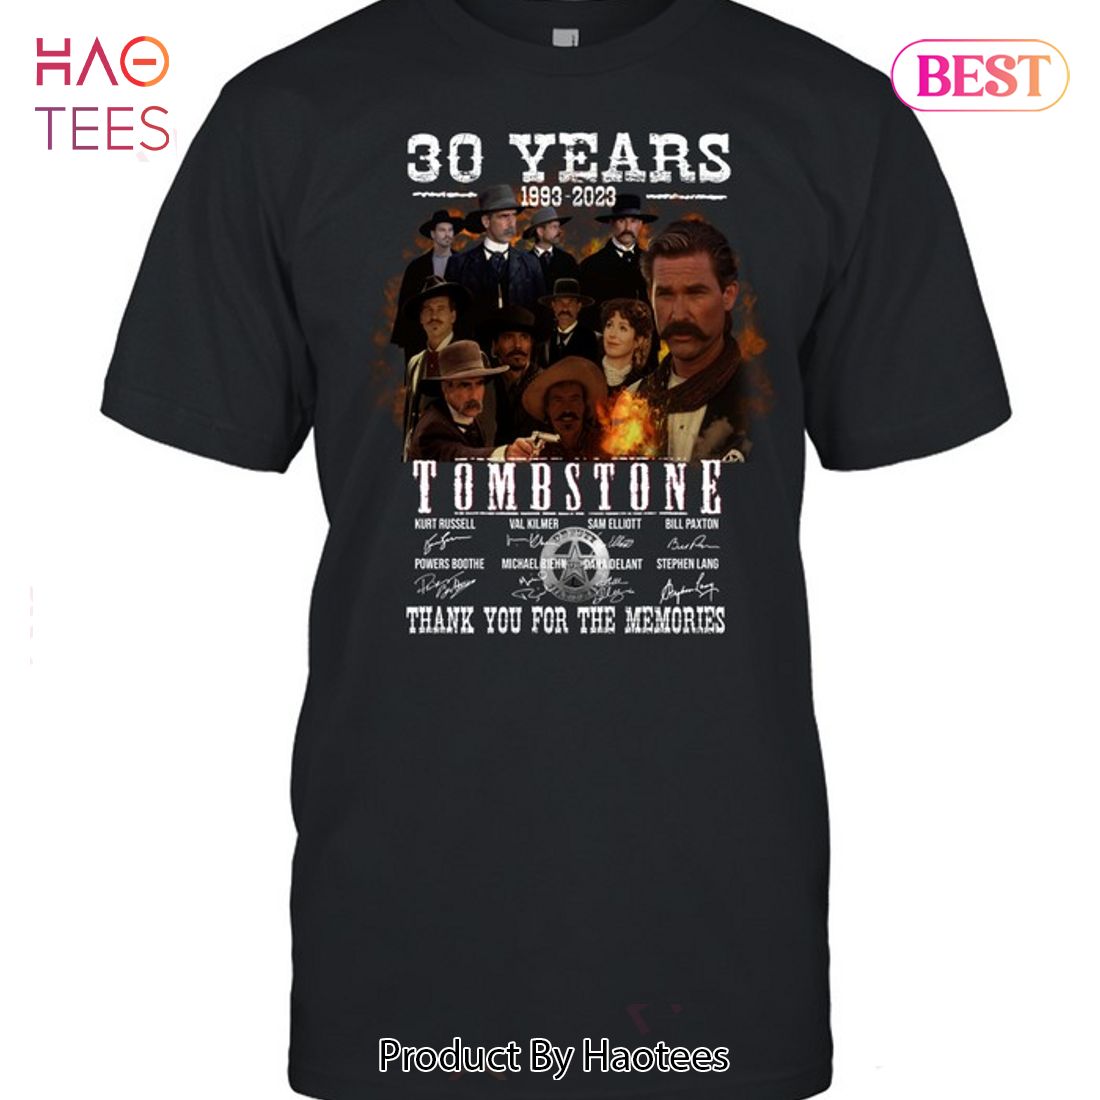 NEW Tombstune 30 Years 1993-2023 Thank You For The Memories T-Shirt